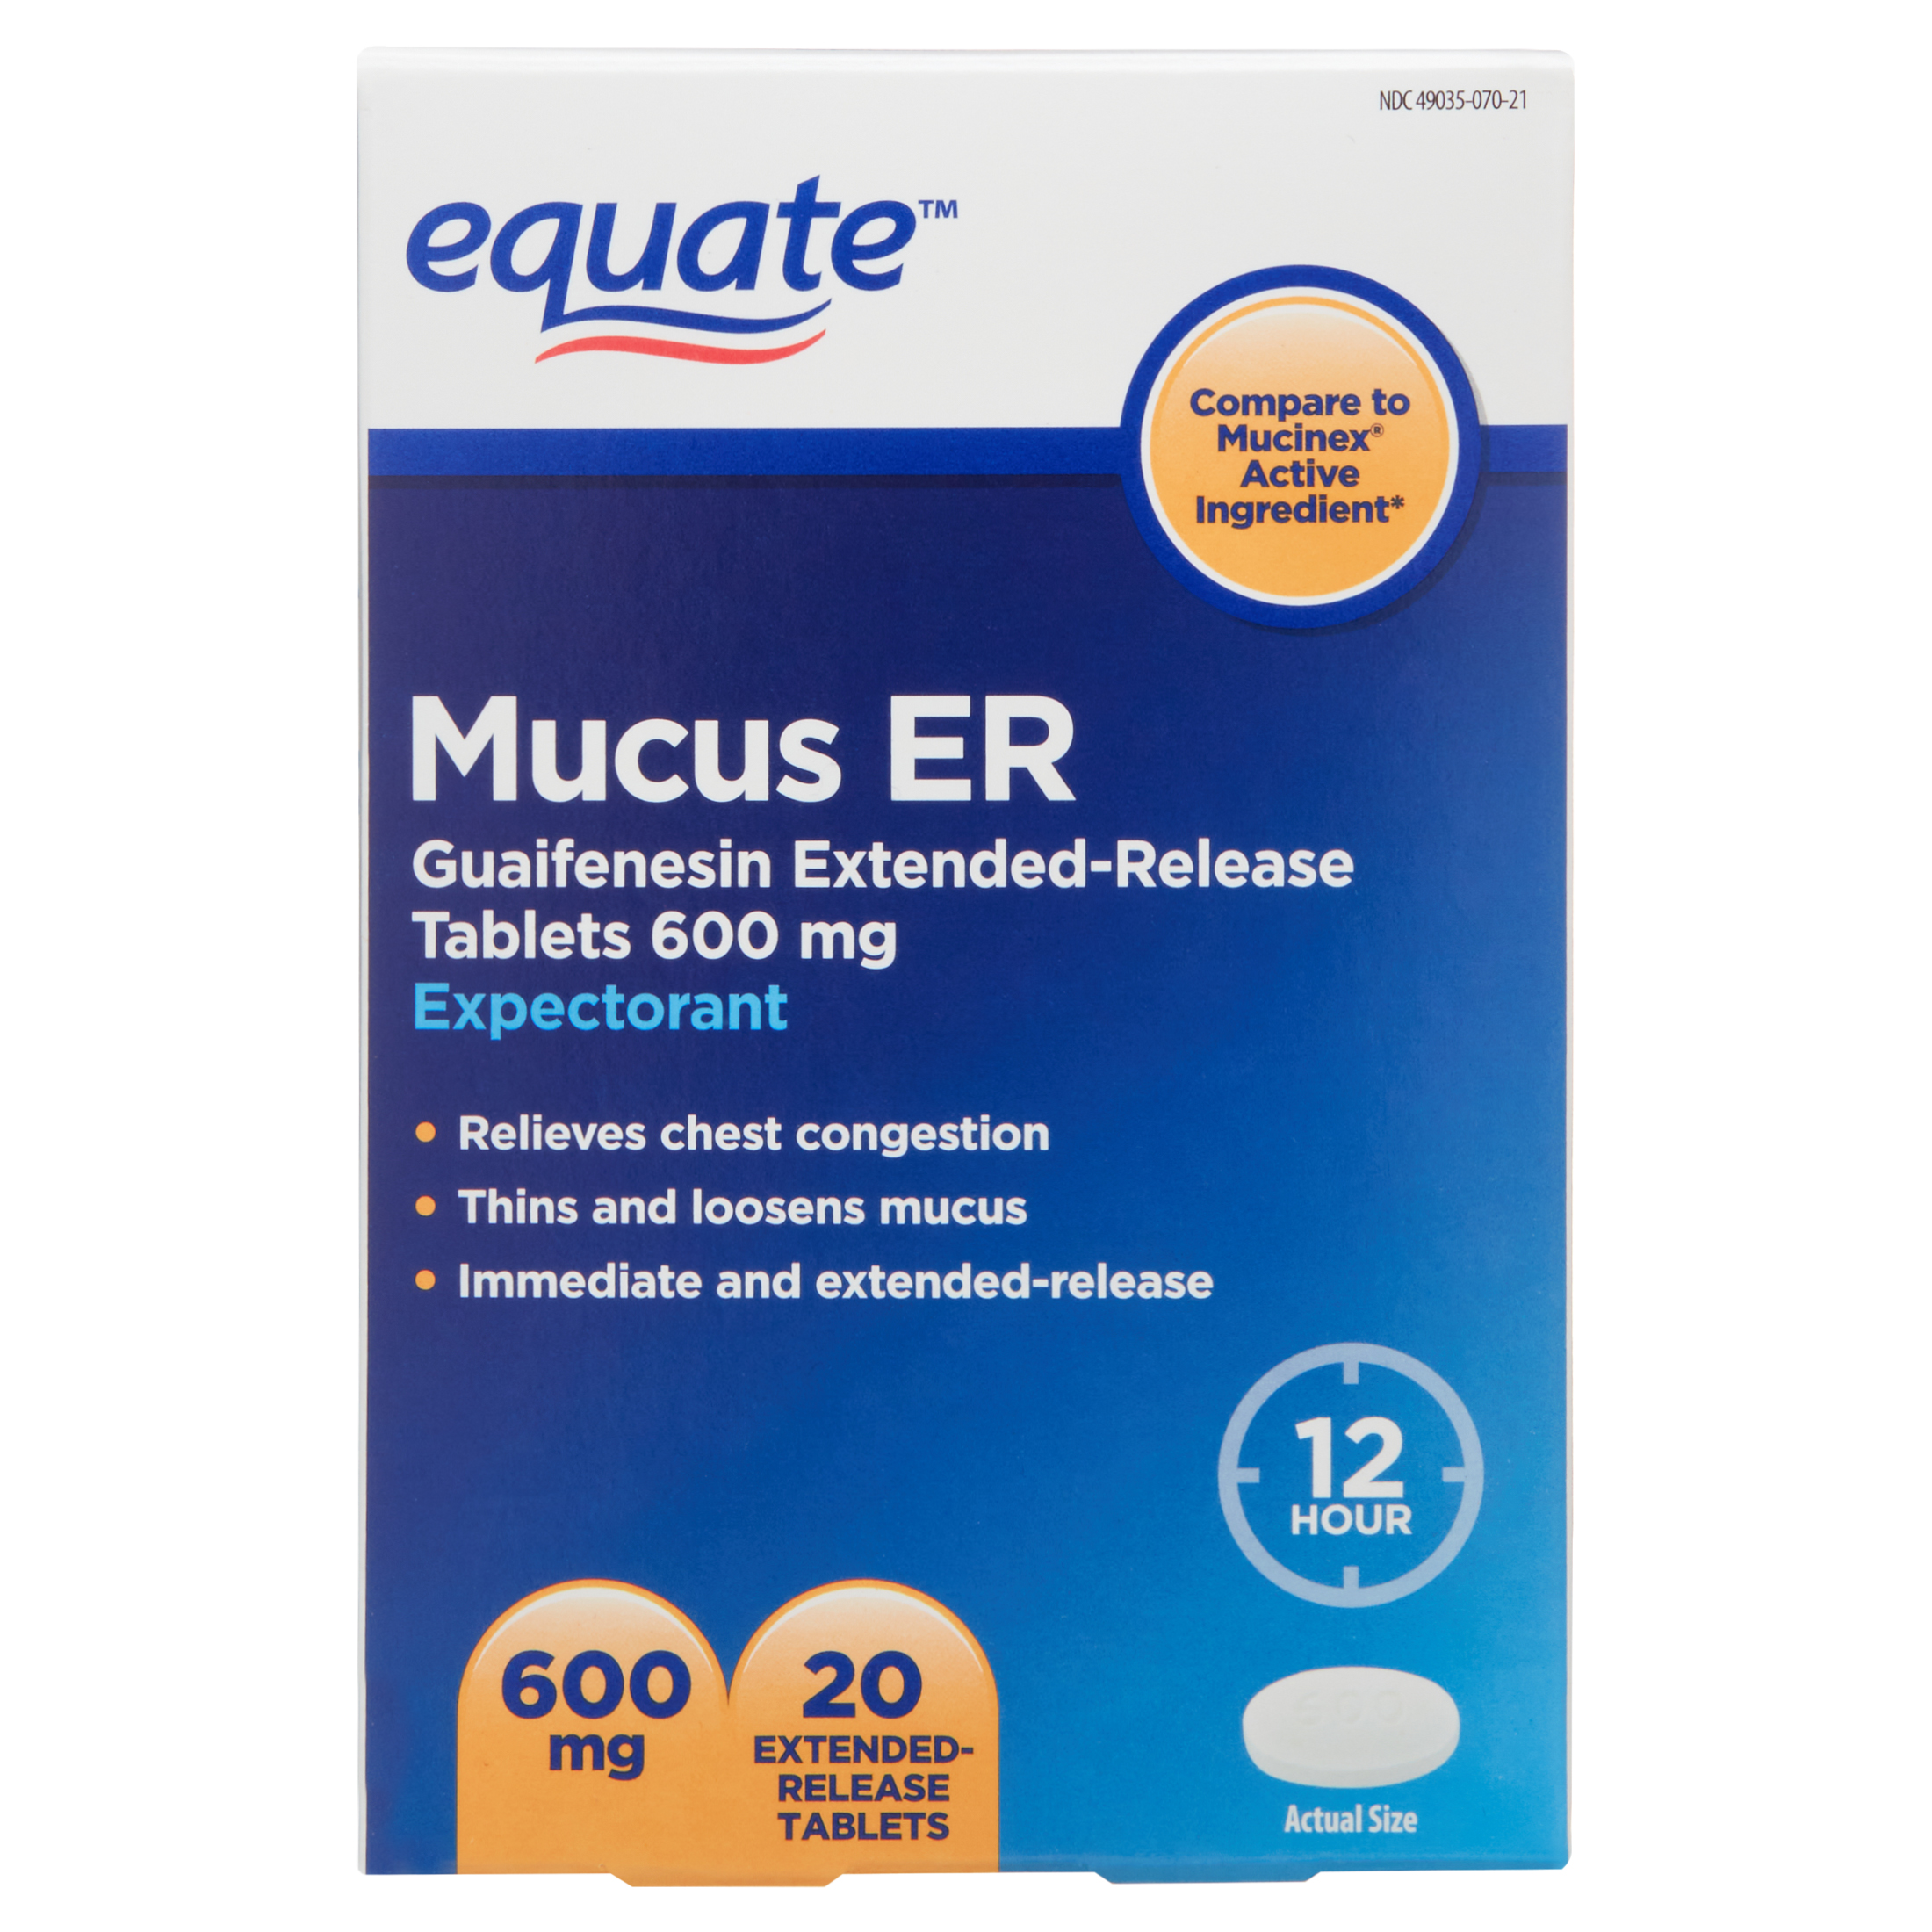 Equate Mucus ER Extended-Release Tablets, 600 mg, 20 Count - image 1 of 6